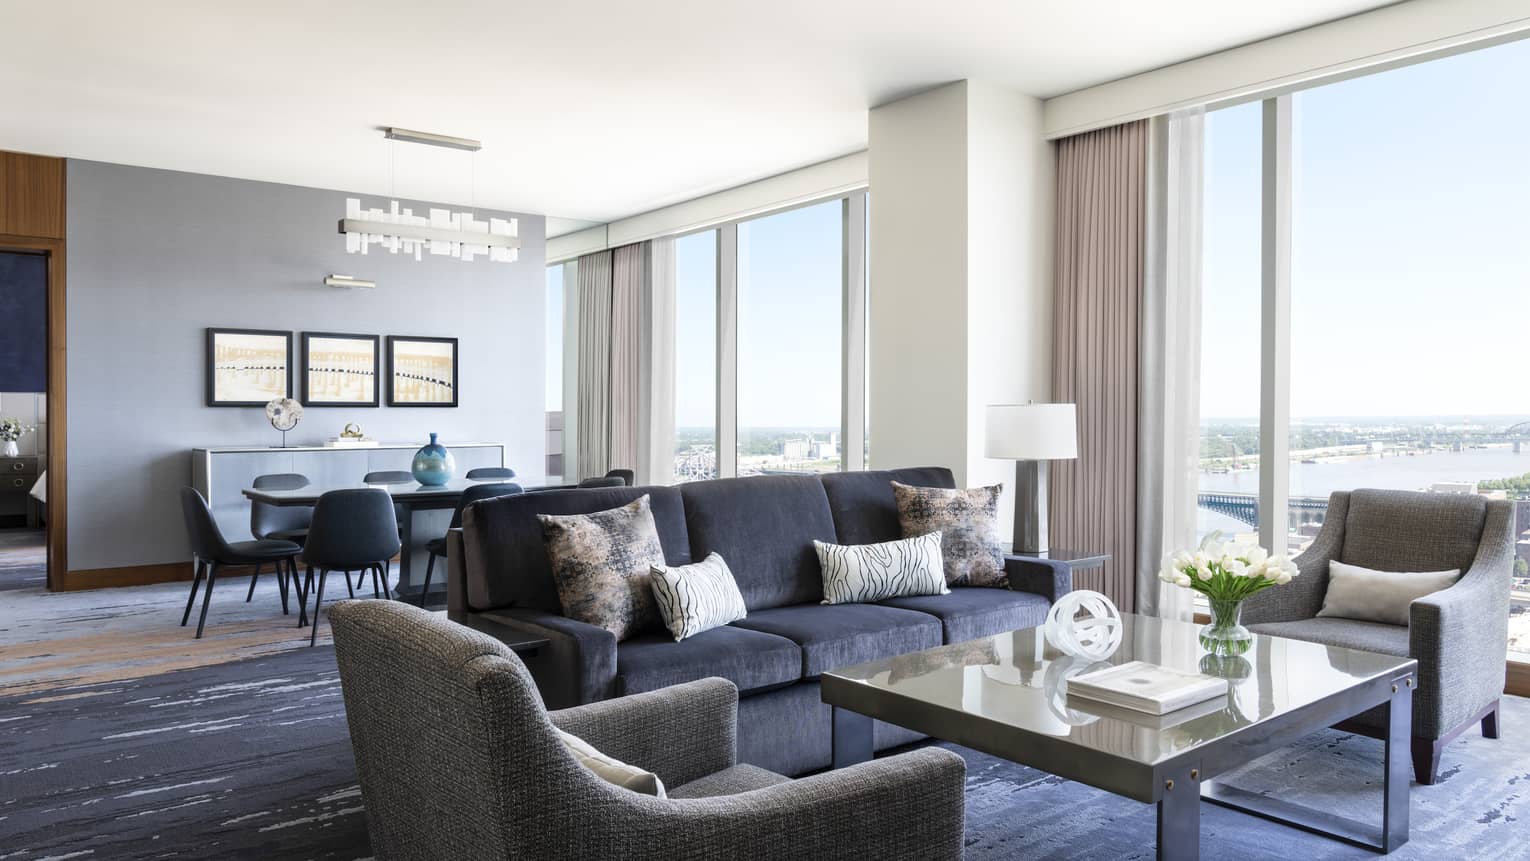 Hotel suite living room with dark blue sofa, two grey arm chairs, large square coffee table and wall of windows